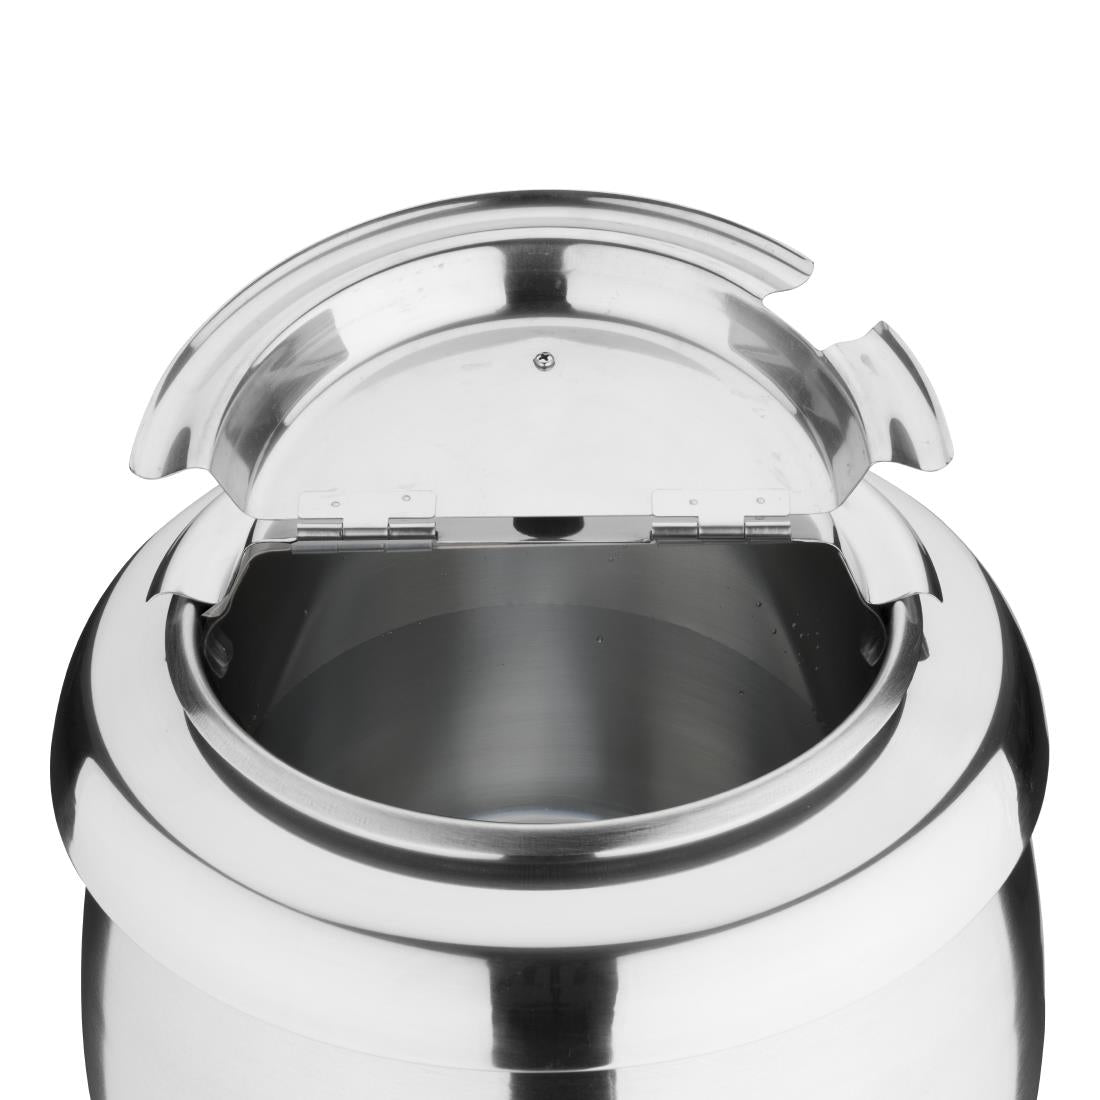 Buffalo Stainless Steel Soup Kettle L714 JD Catering Equipment Solutions Ltd